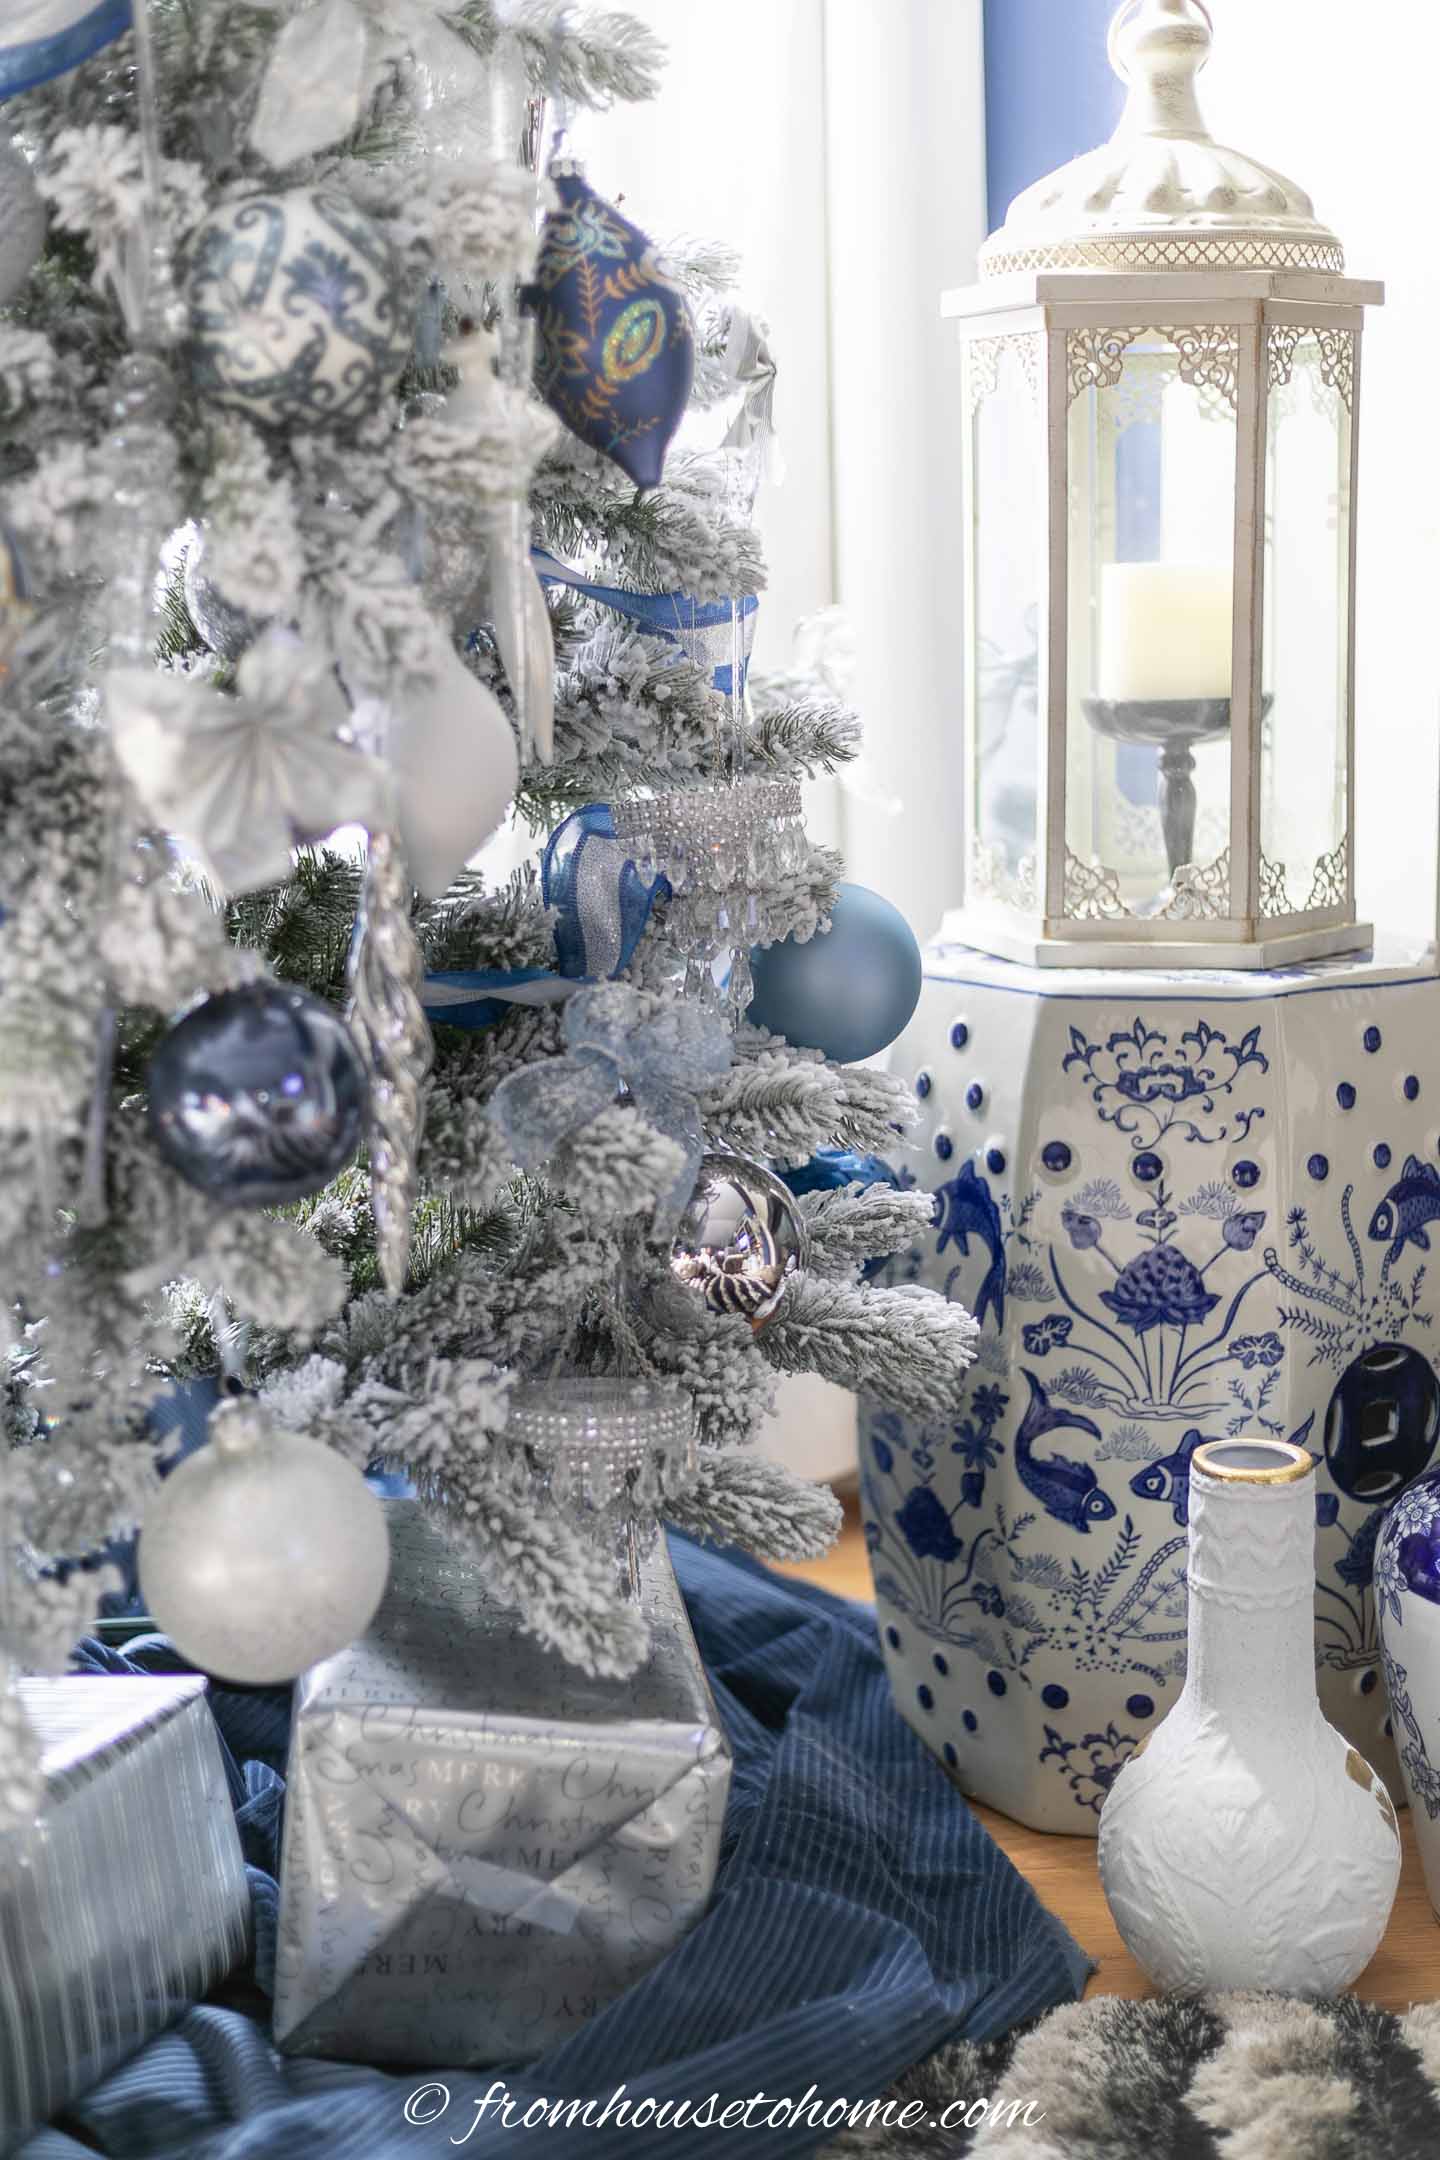 blue and white garden stool beside a wintry white, blue and silver christmas tree